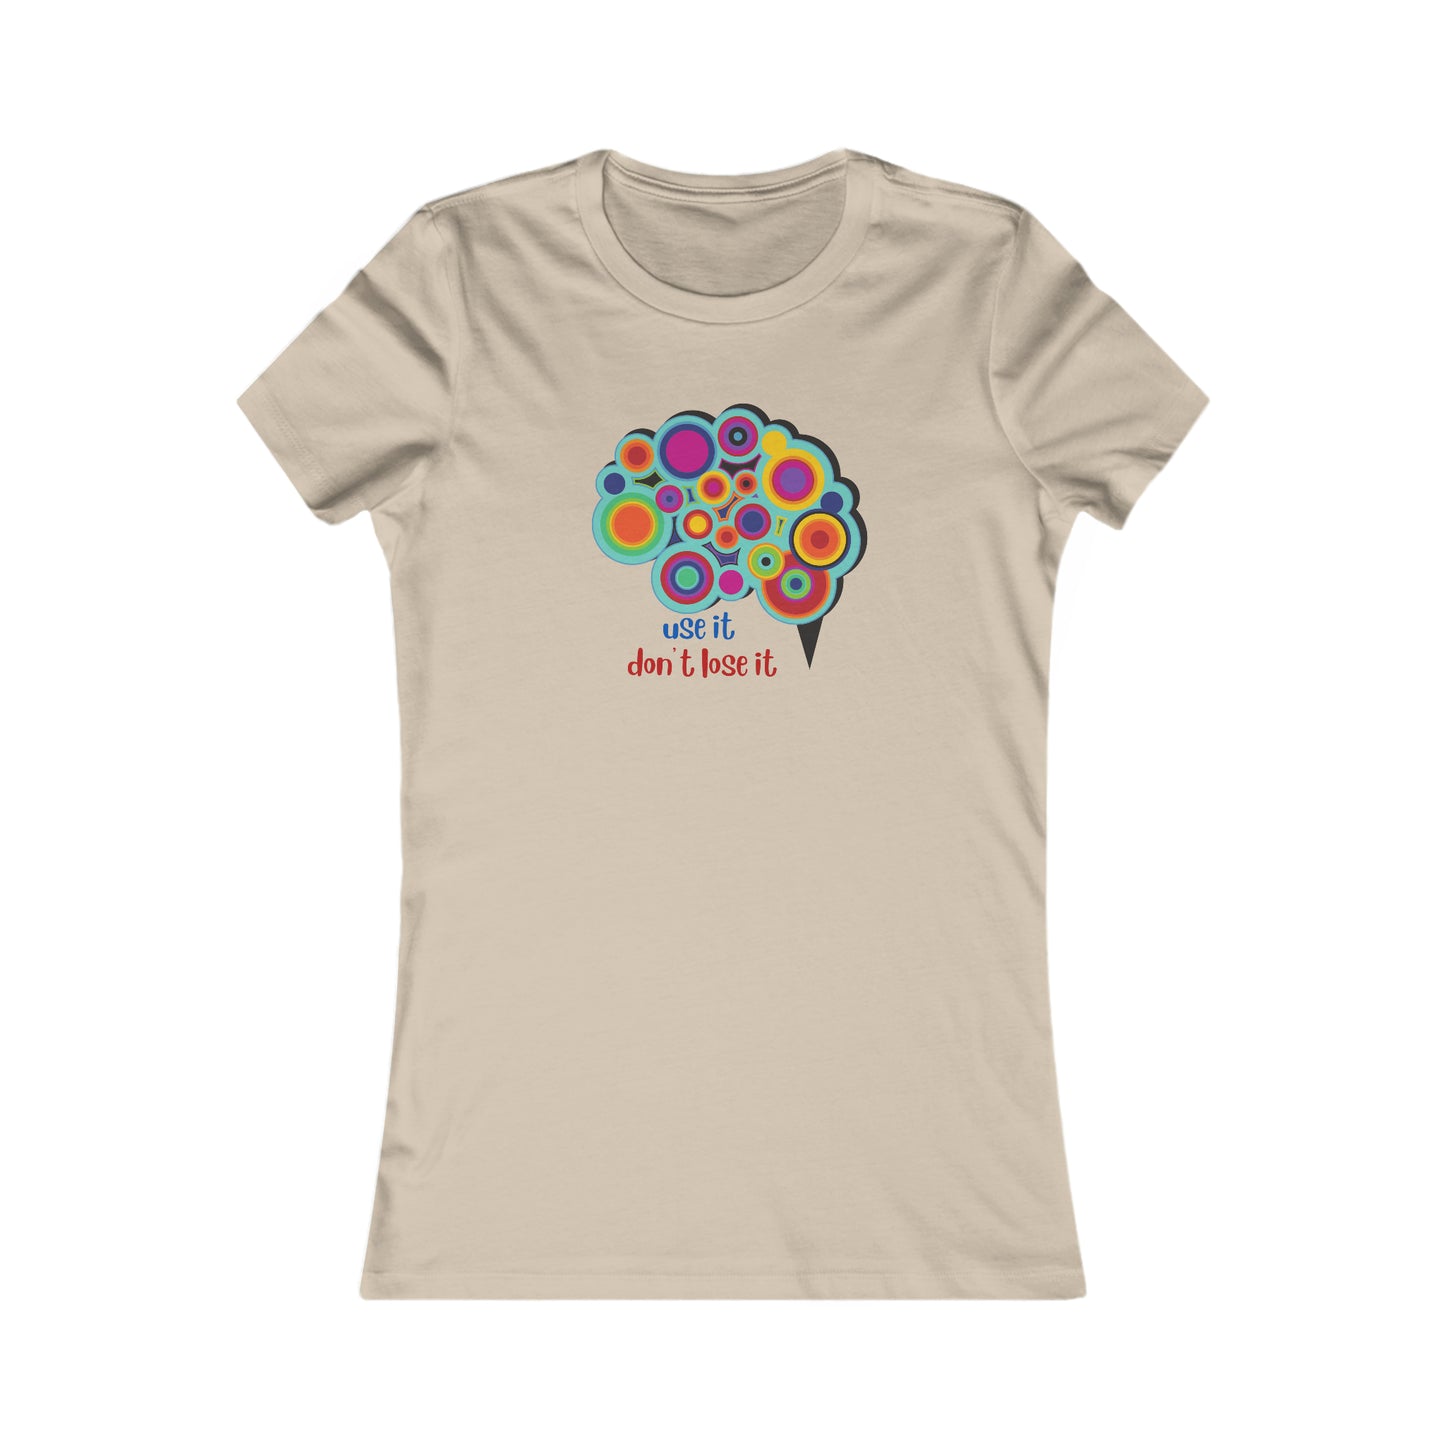 We all know we have to “use it don’t lose it” and that also applies to our brains is the message of this Women's Favorite Tee design. Slim fit so please check the size table.